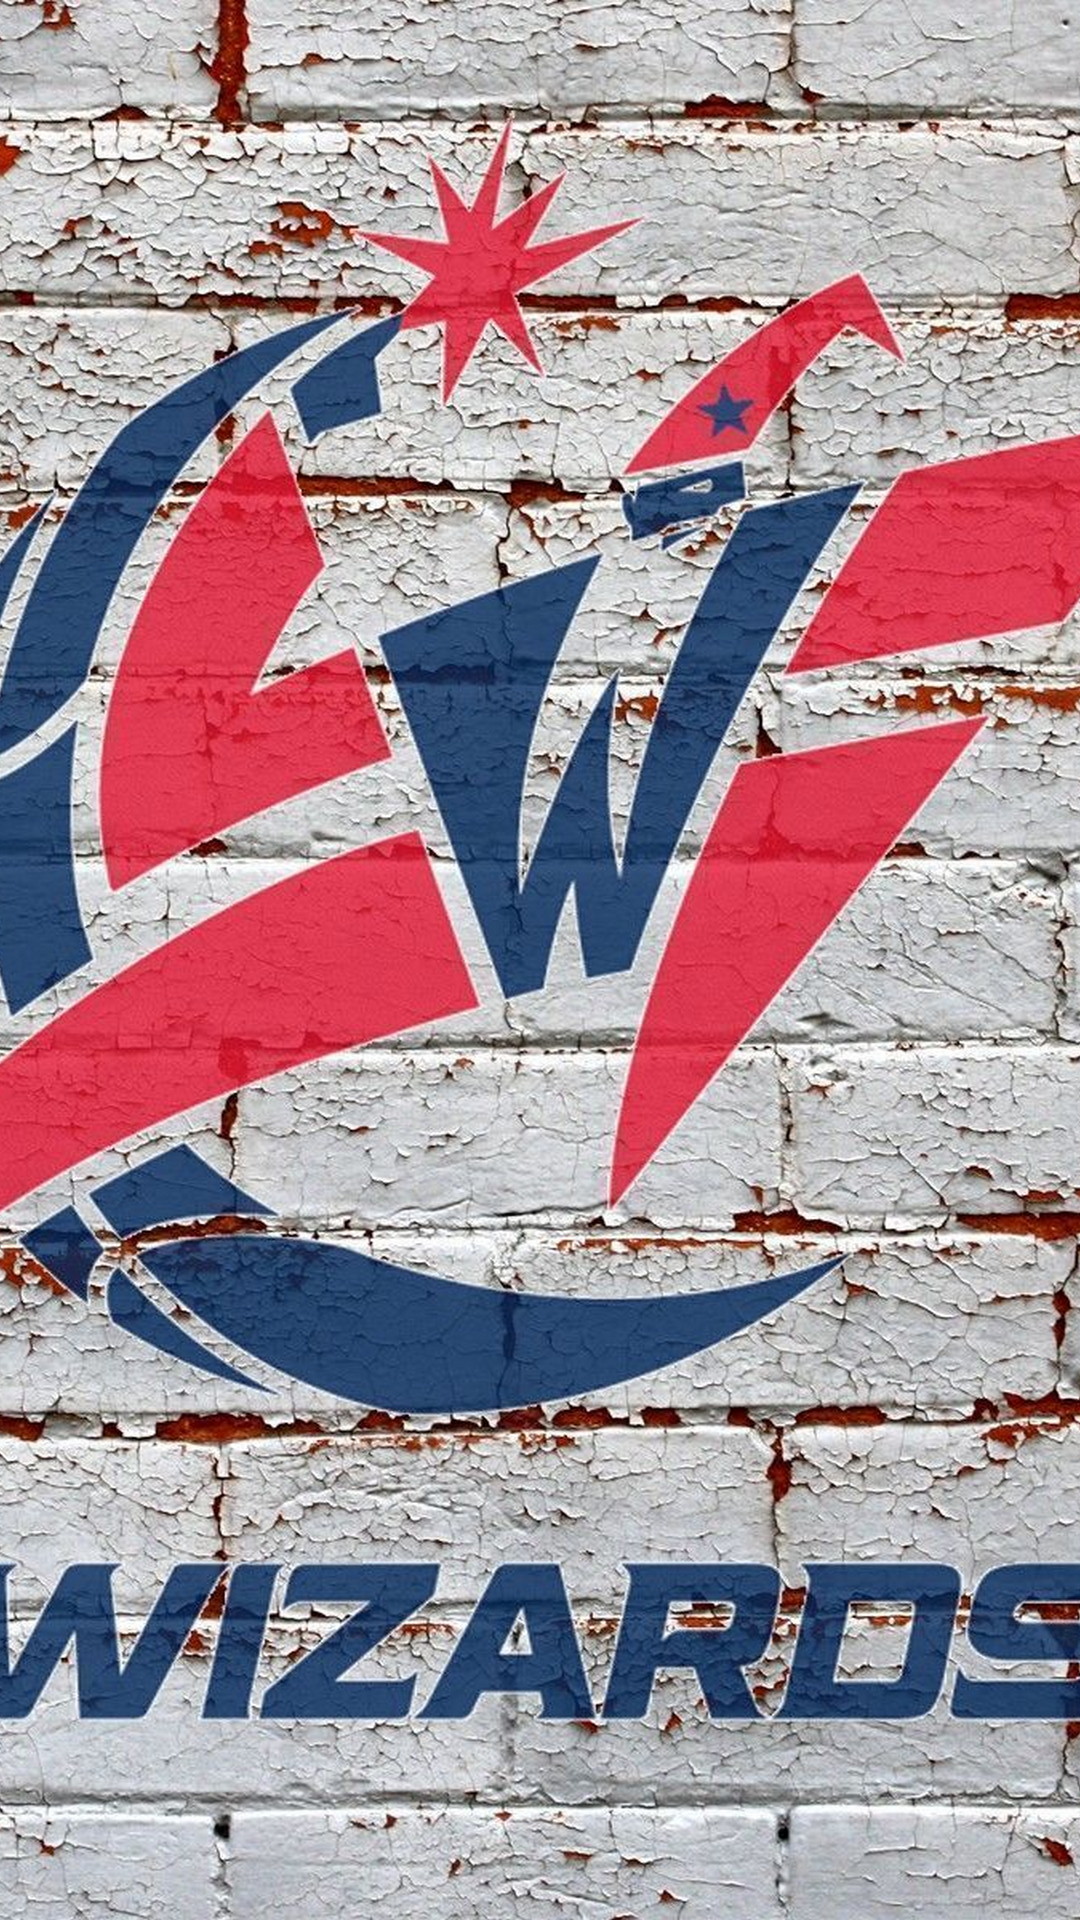 Washington Wizards HD Wallpaper For iPhone with high-resolution 1080x1920 pixel. You can use this wallpaper for your Desktop Computer Backgrounds, Windows or Mac Screensavers, iPhone Lock screen, Tablet or Android and another Mobile Phone device